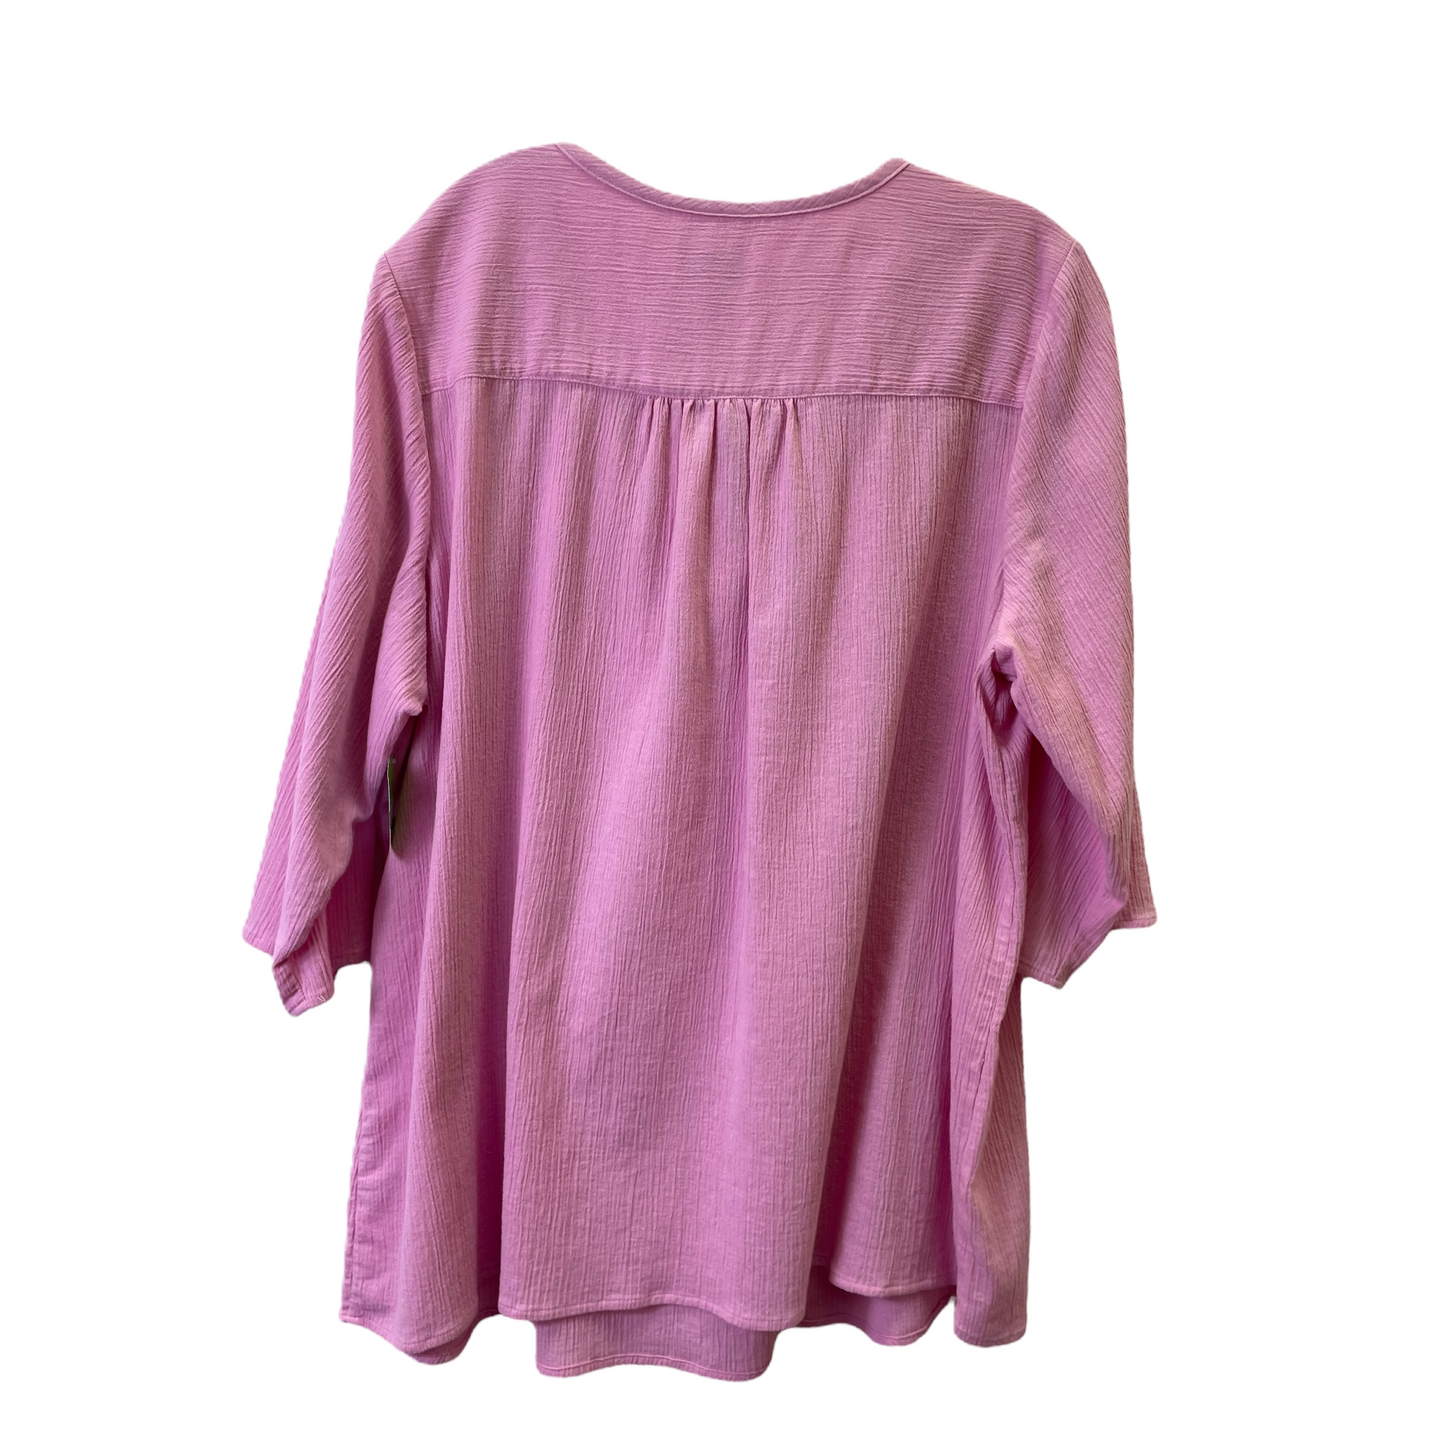 Pink Top 3/4 Sleeve By Denim And Company, Size: 1x